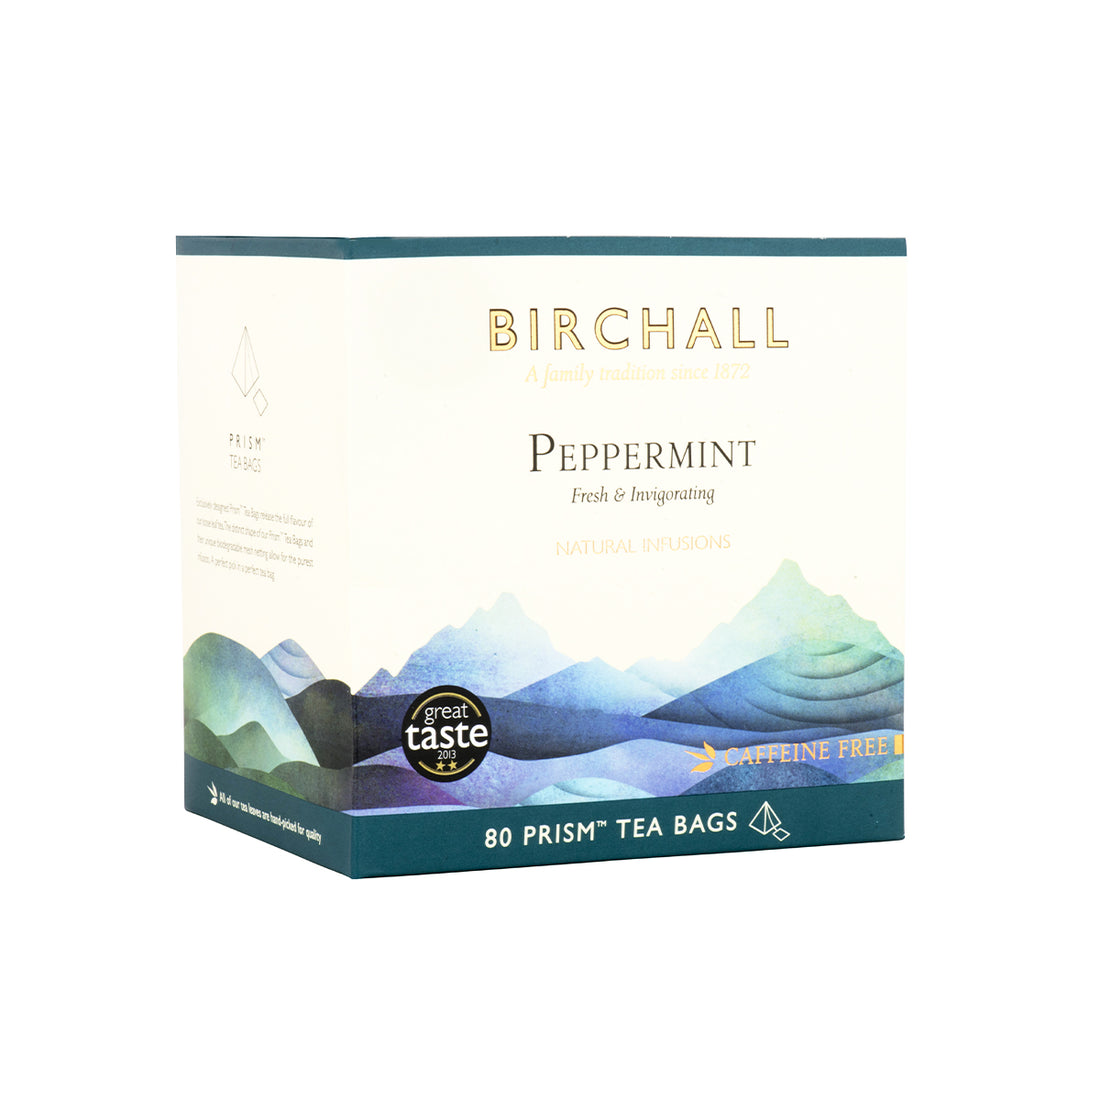 Birchall, Birchall Plant-Based Prism Tea Bags 80pcs - Peppermint, Redber Coffee